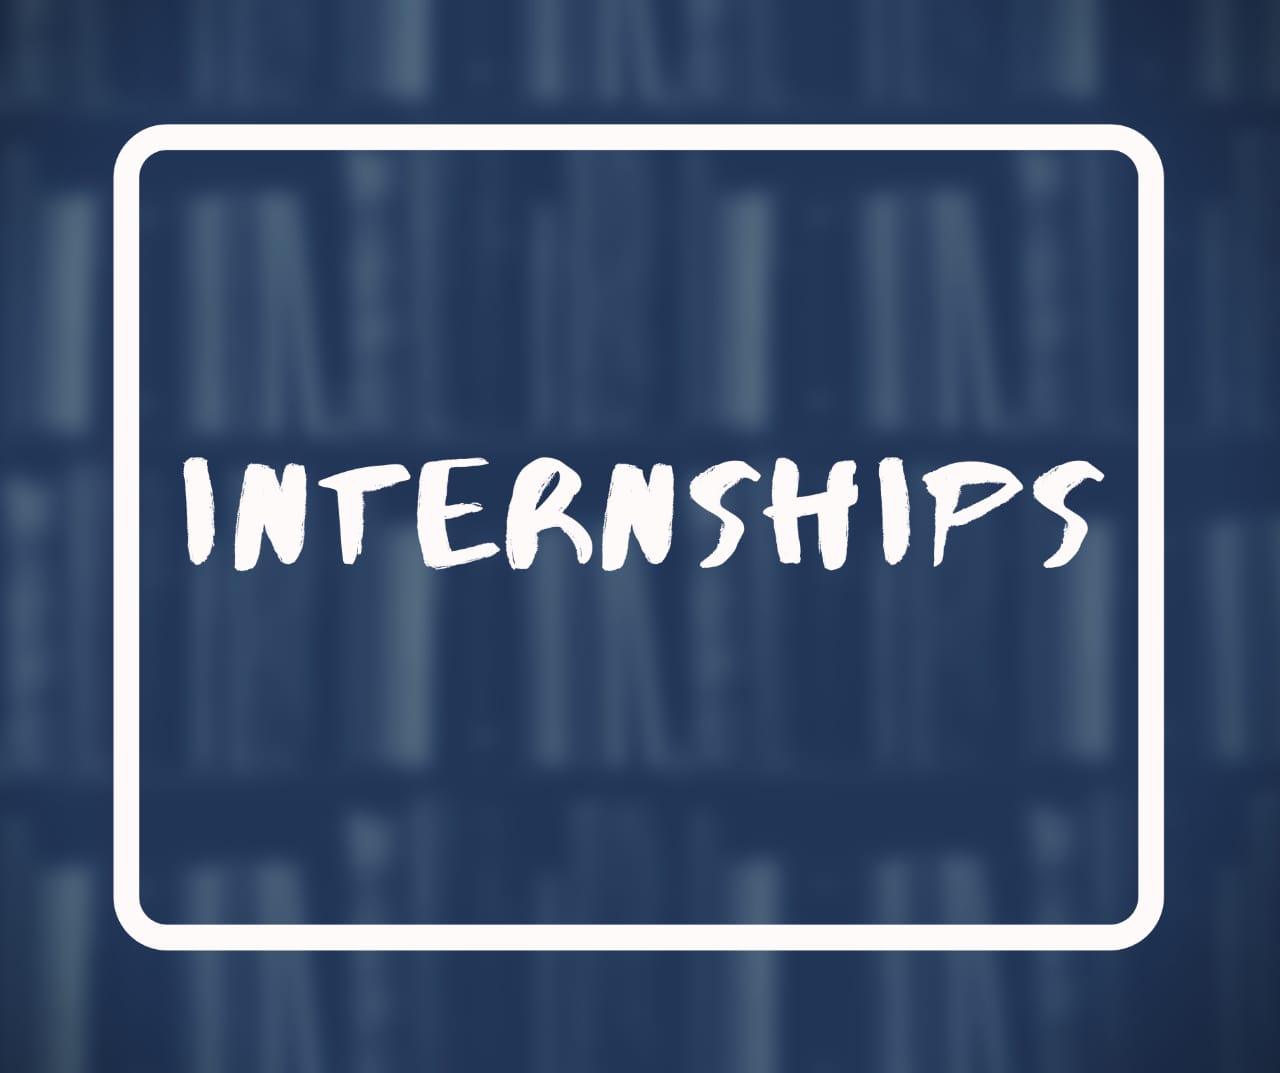 KPS Advocates has an online internship opportunity—apply now!